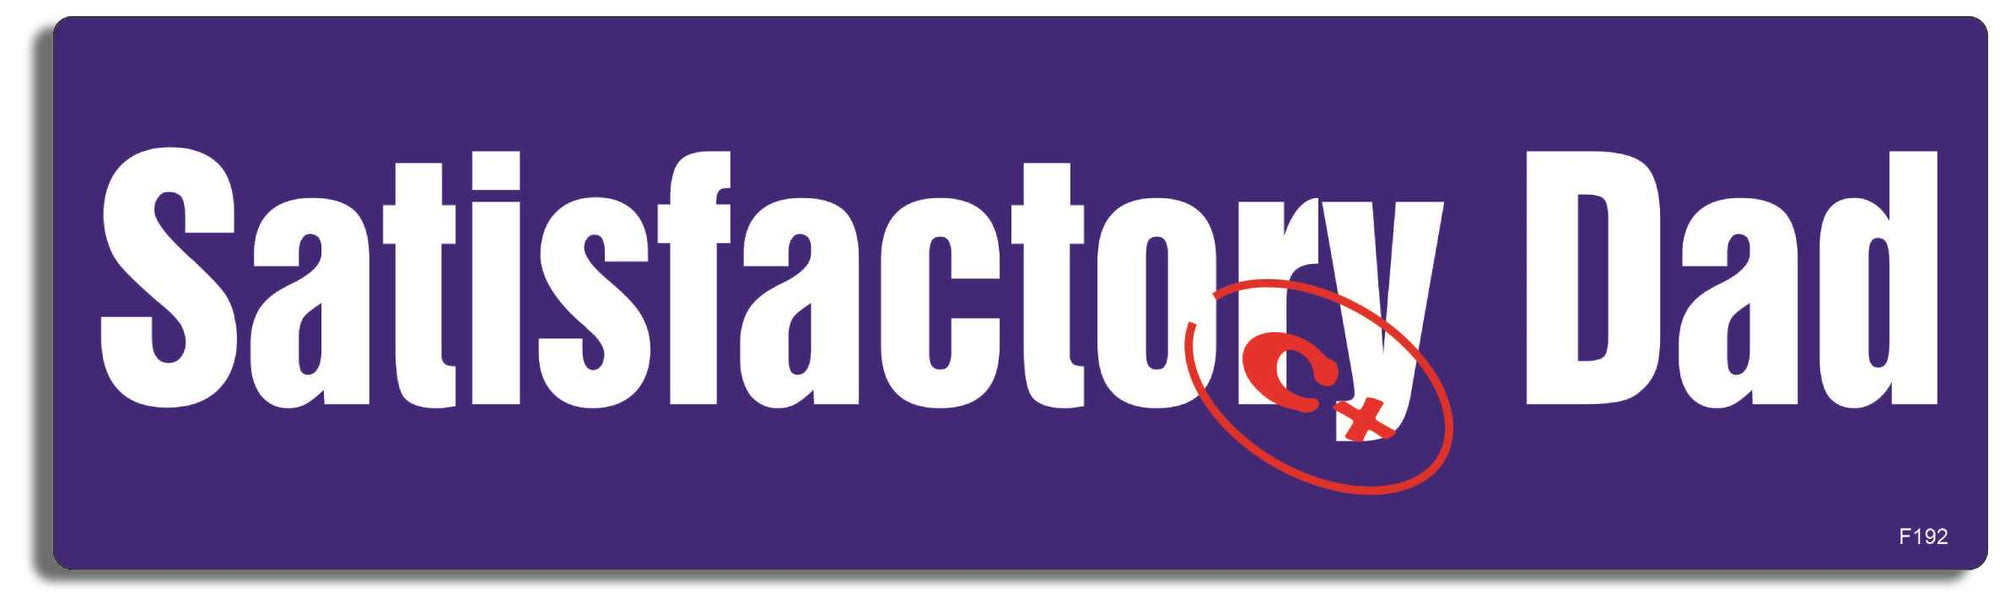 Satisfactory Dad -  3" x 10" -  Decal Bumper Sticker-funny Bumper Sticker Car Magnet Satisfactory Dad-  Decal for carsdads, fathers, funny quote, sarcastic